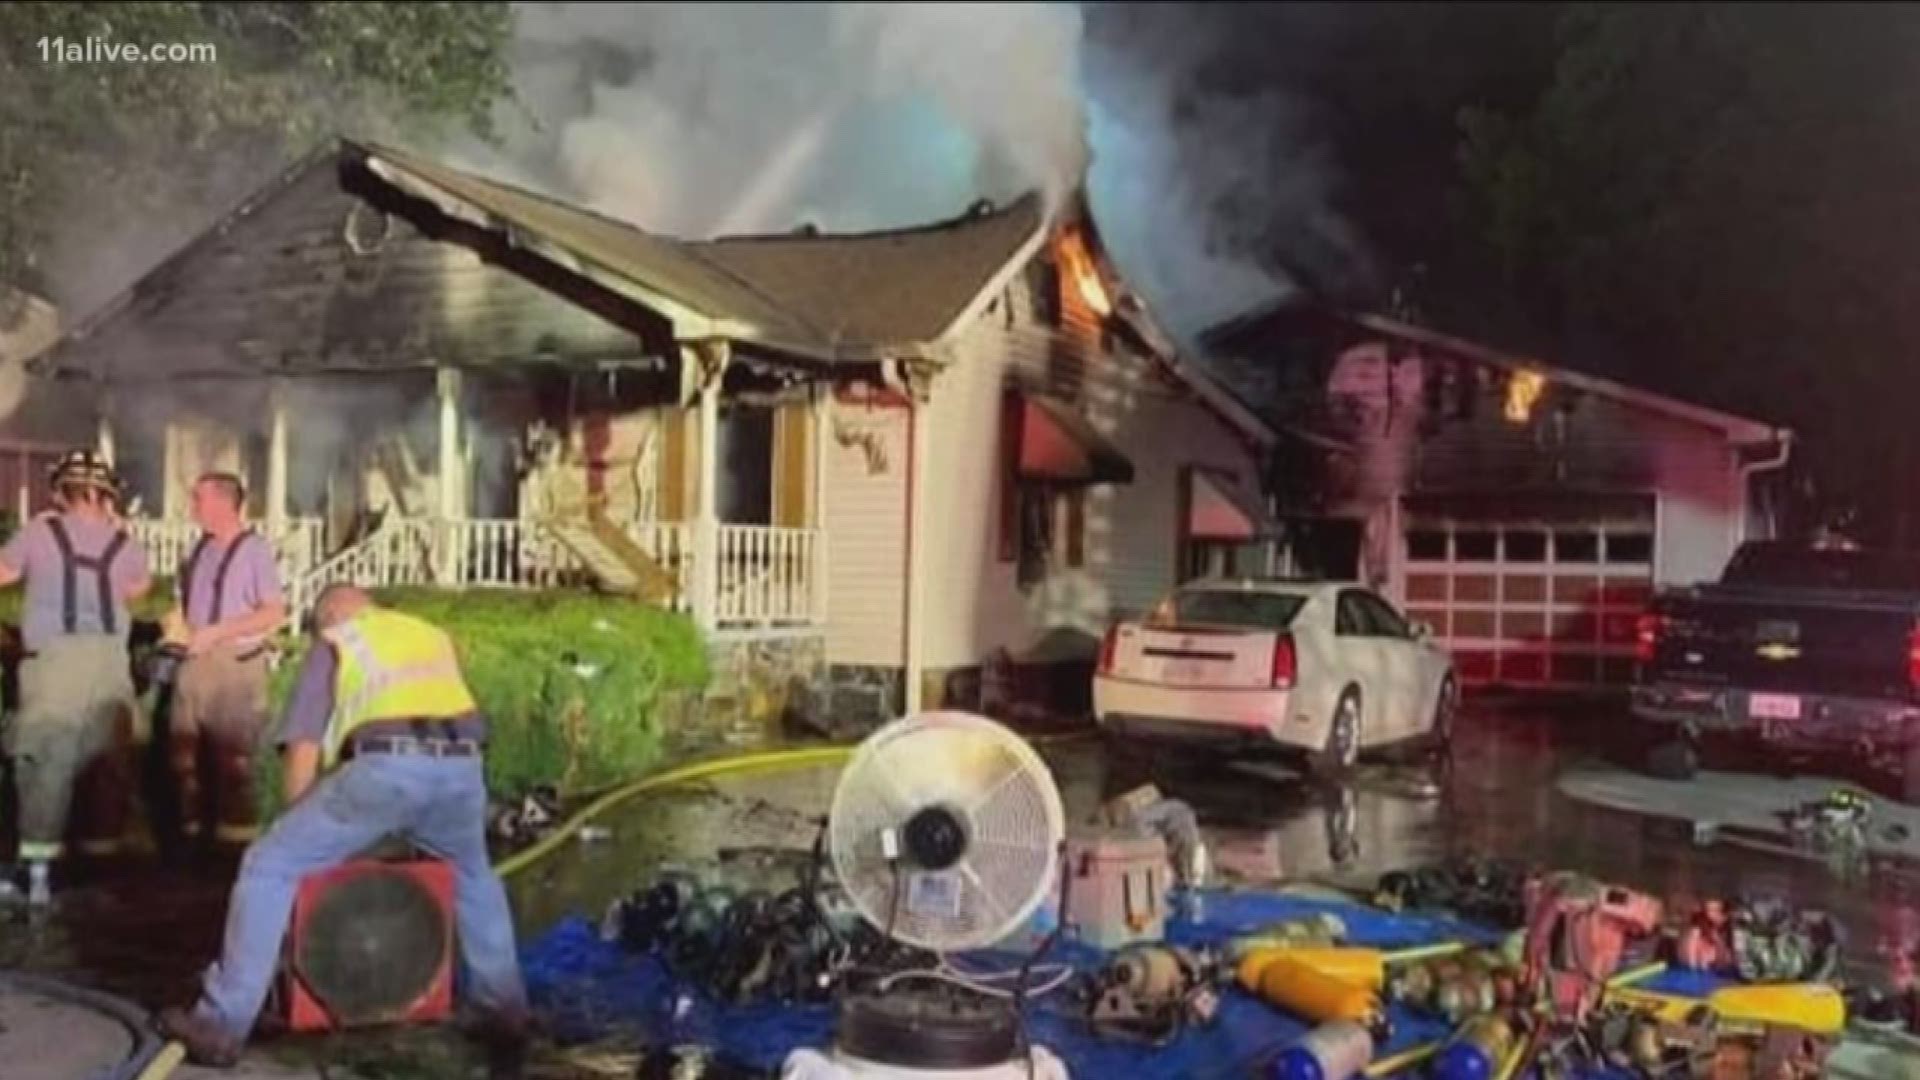 The fire happened around midnight Wednesday at the victim's home.